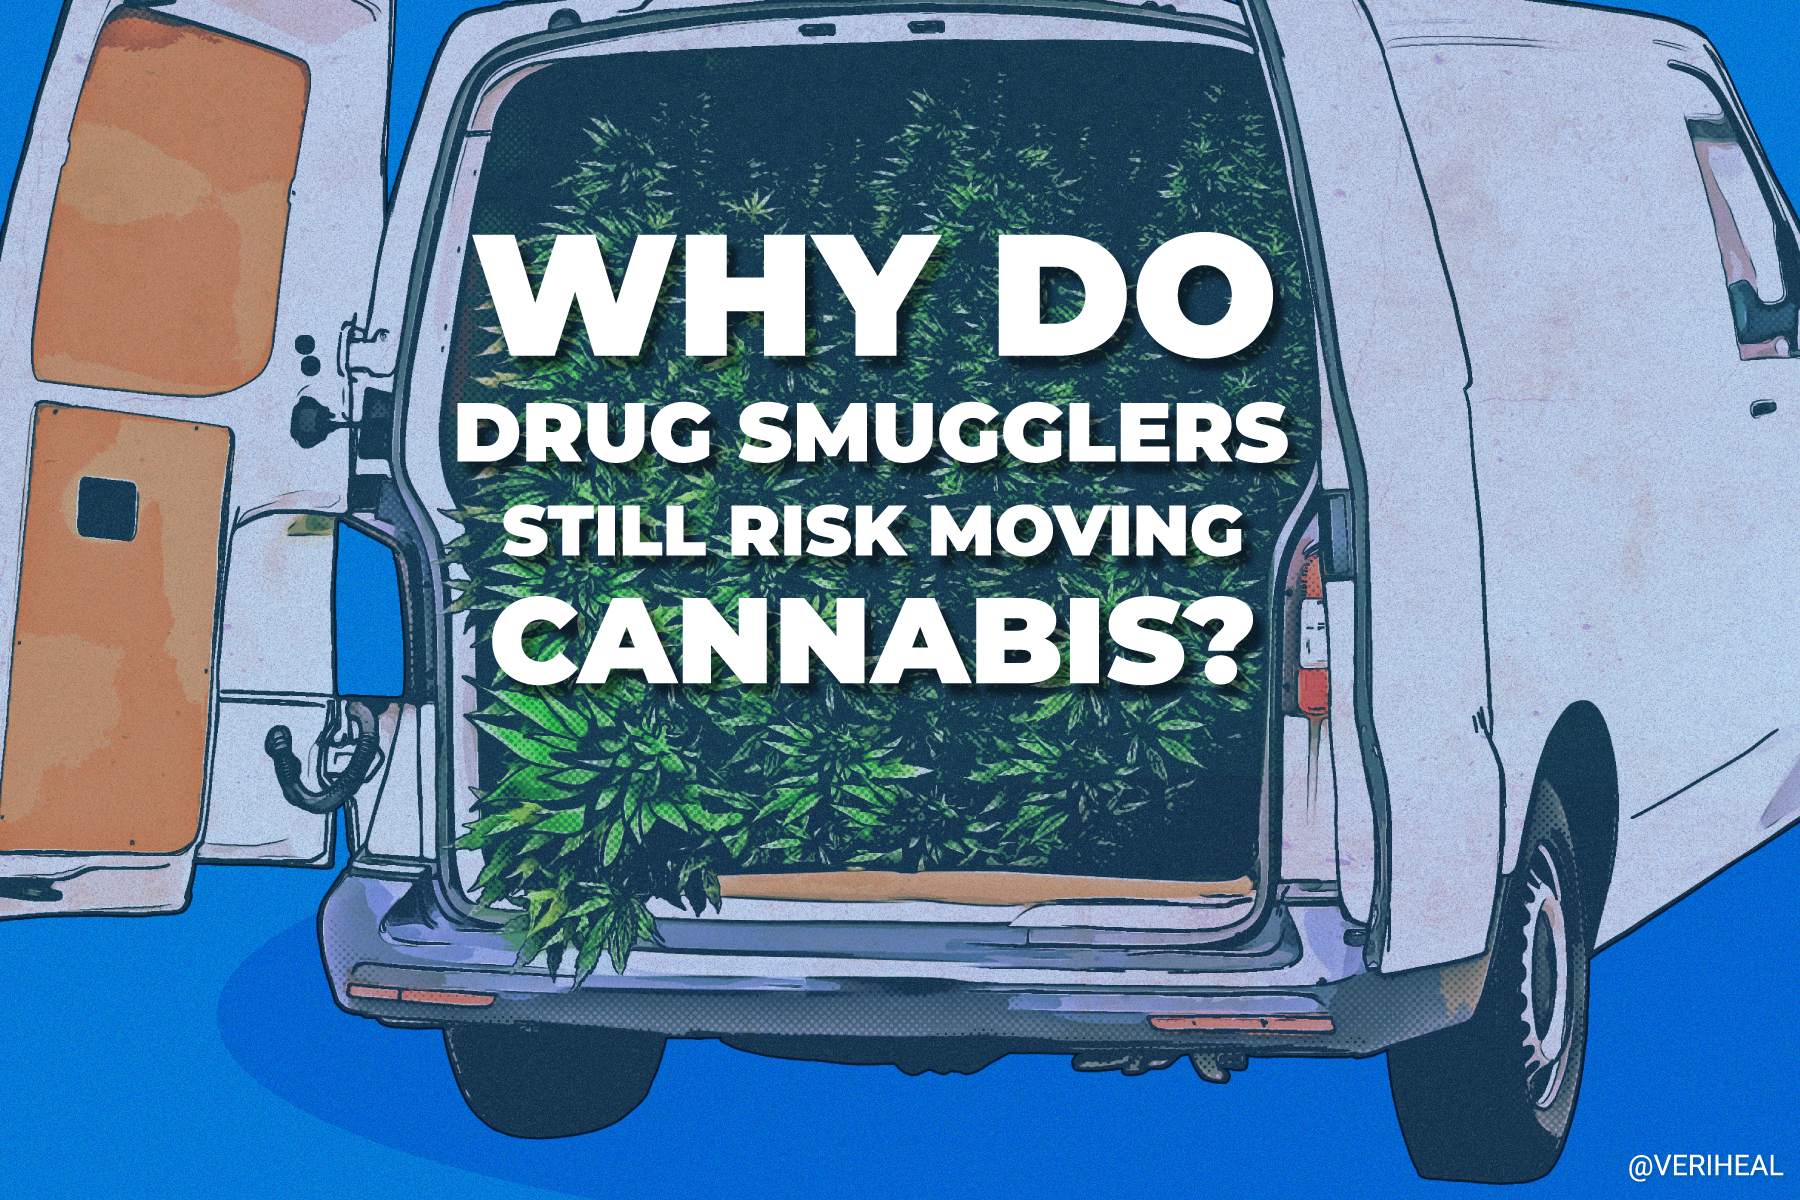 Why Do Drug Smugglers Still Risk Moving Cannabis?